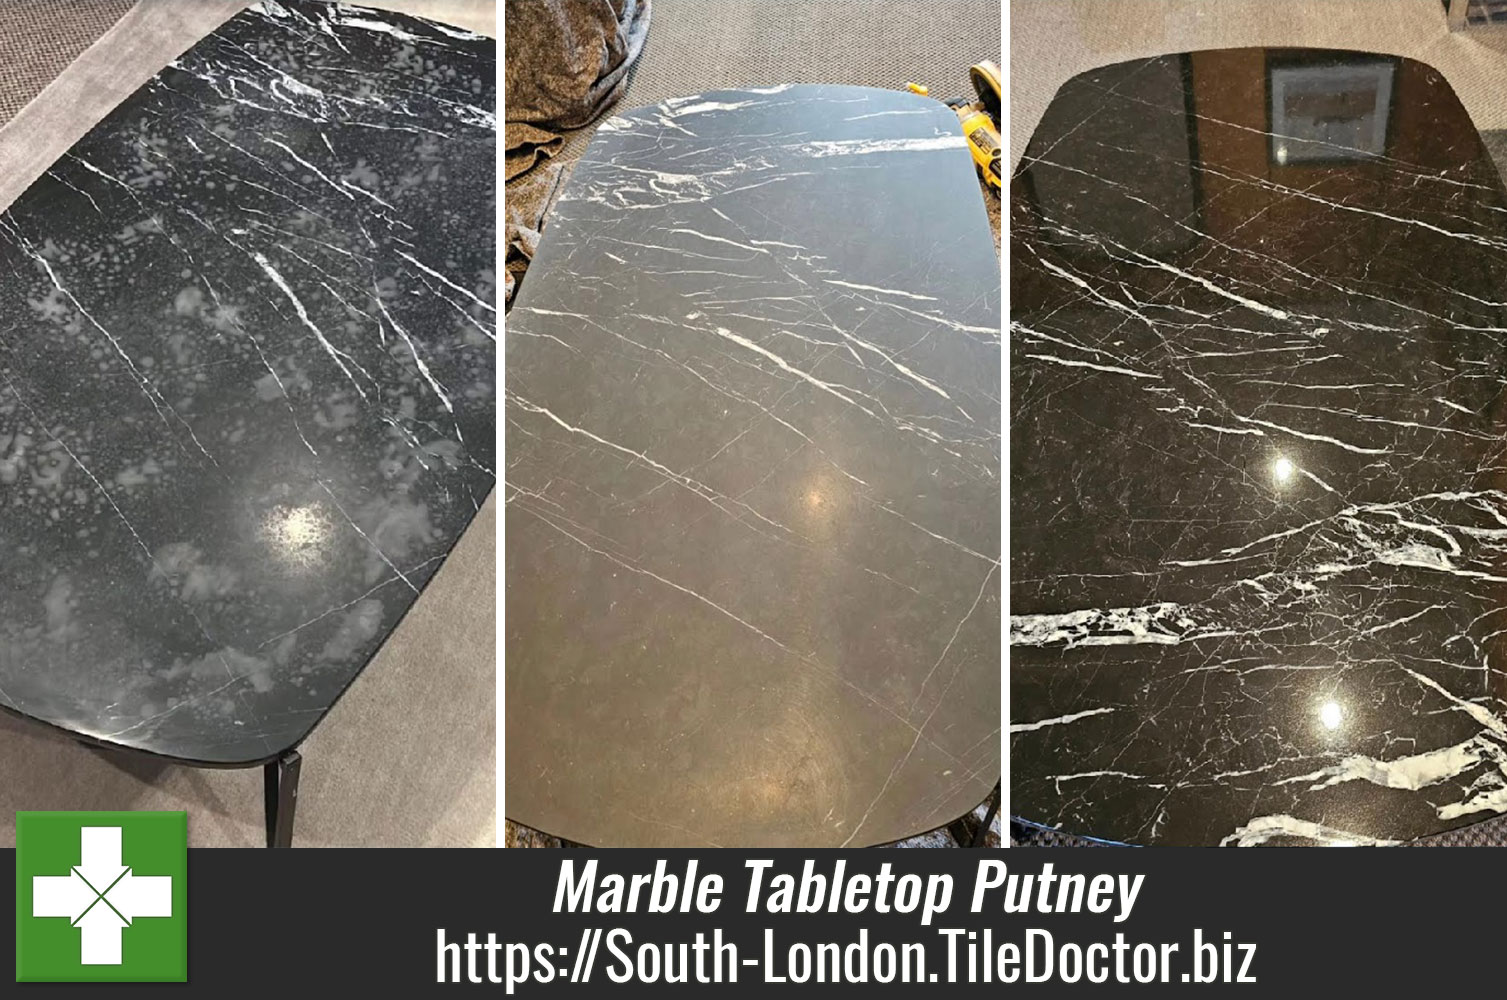 Using Tile Doctor Burnishing Pads to Re-Polish an Acid Etched Stone Table in Putney, London